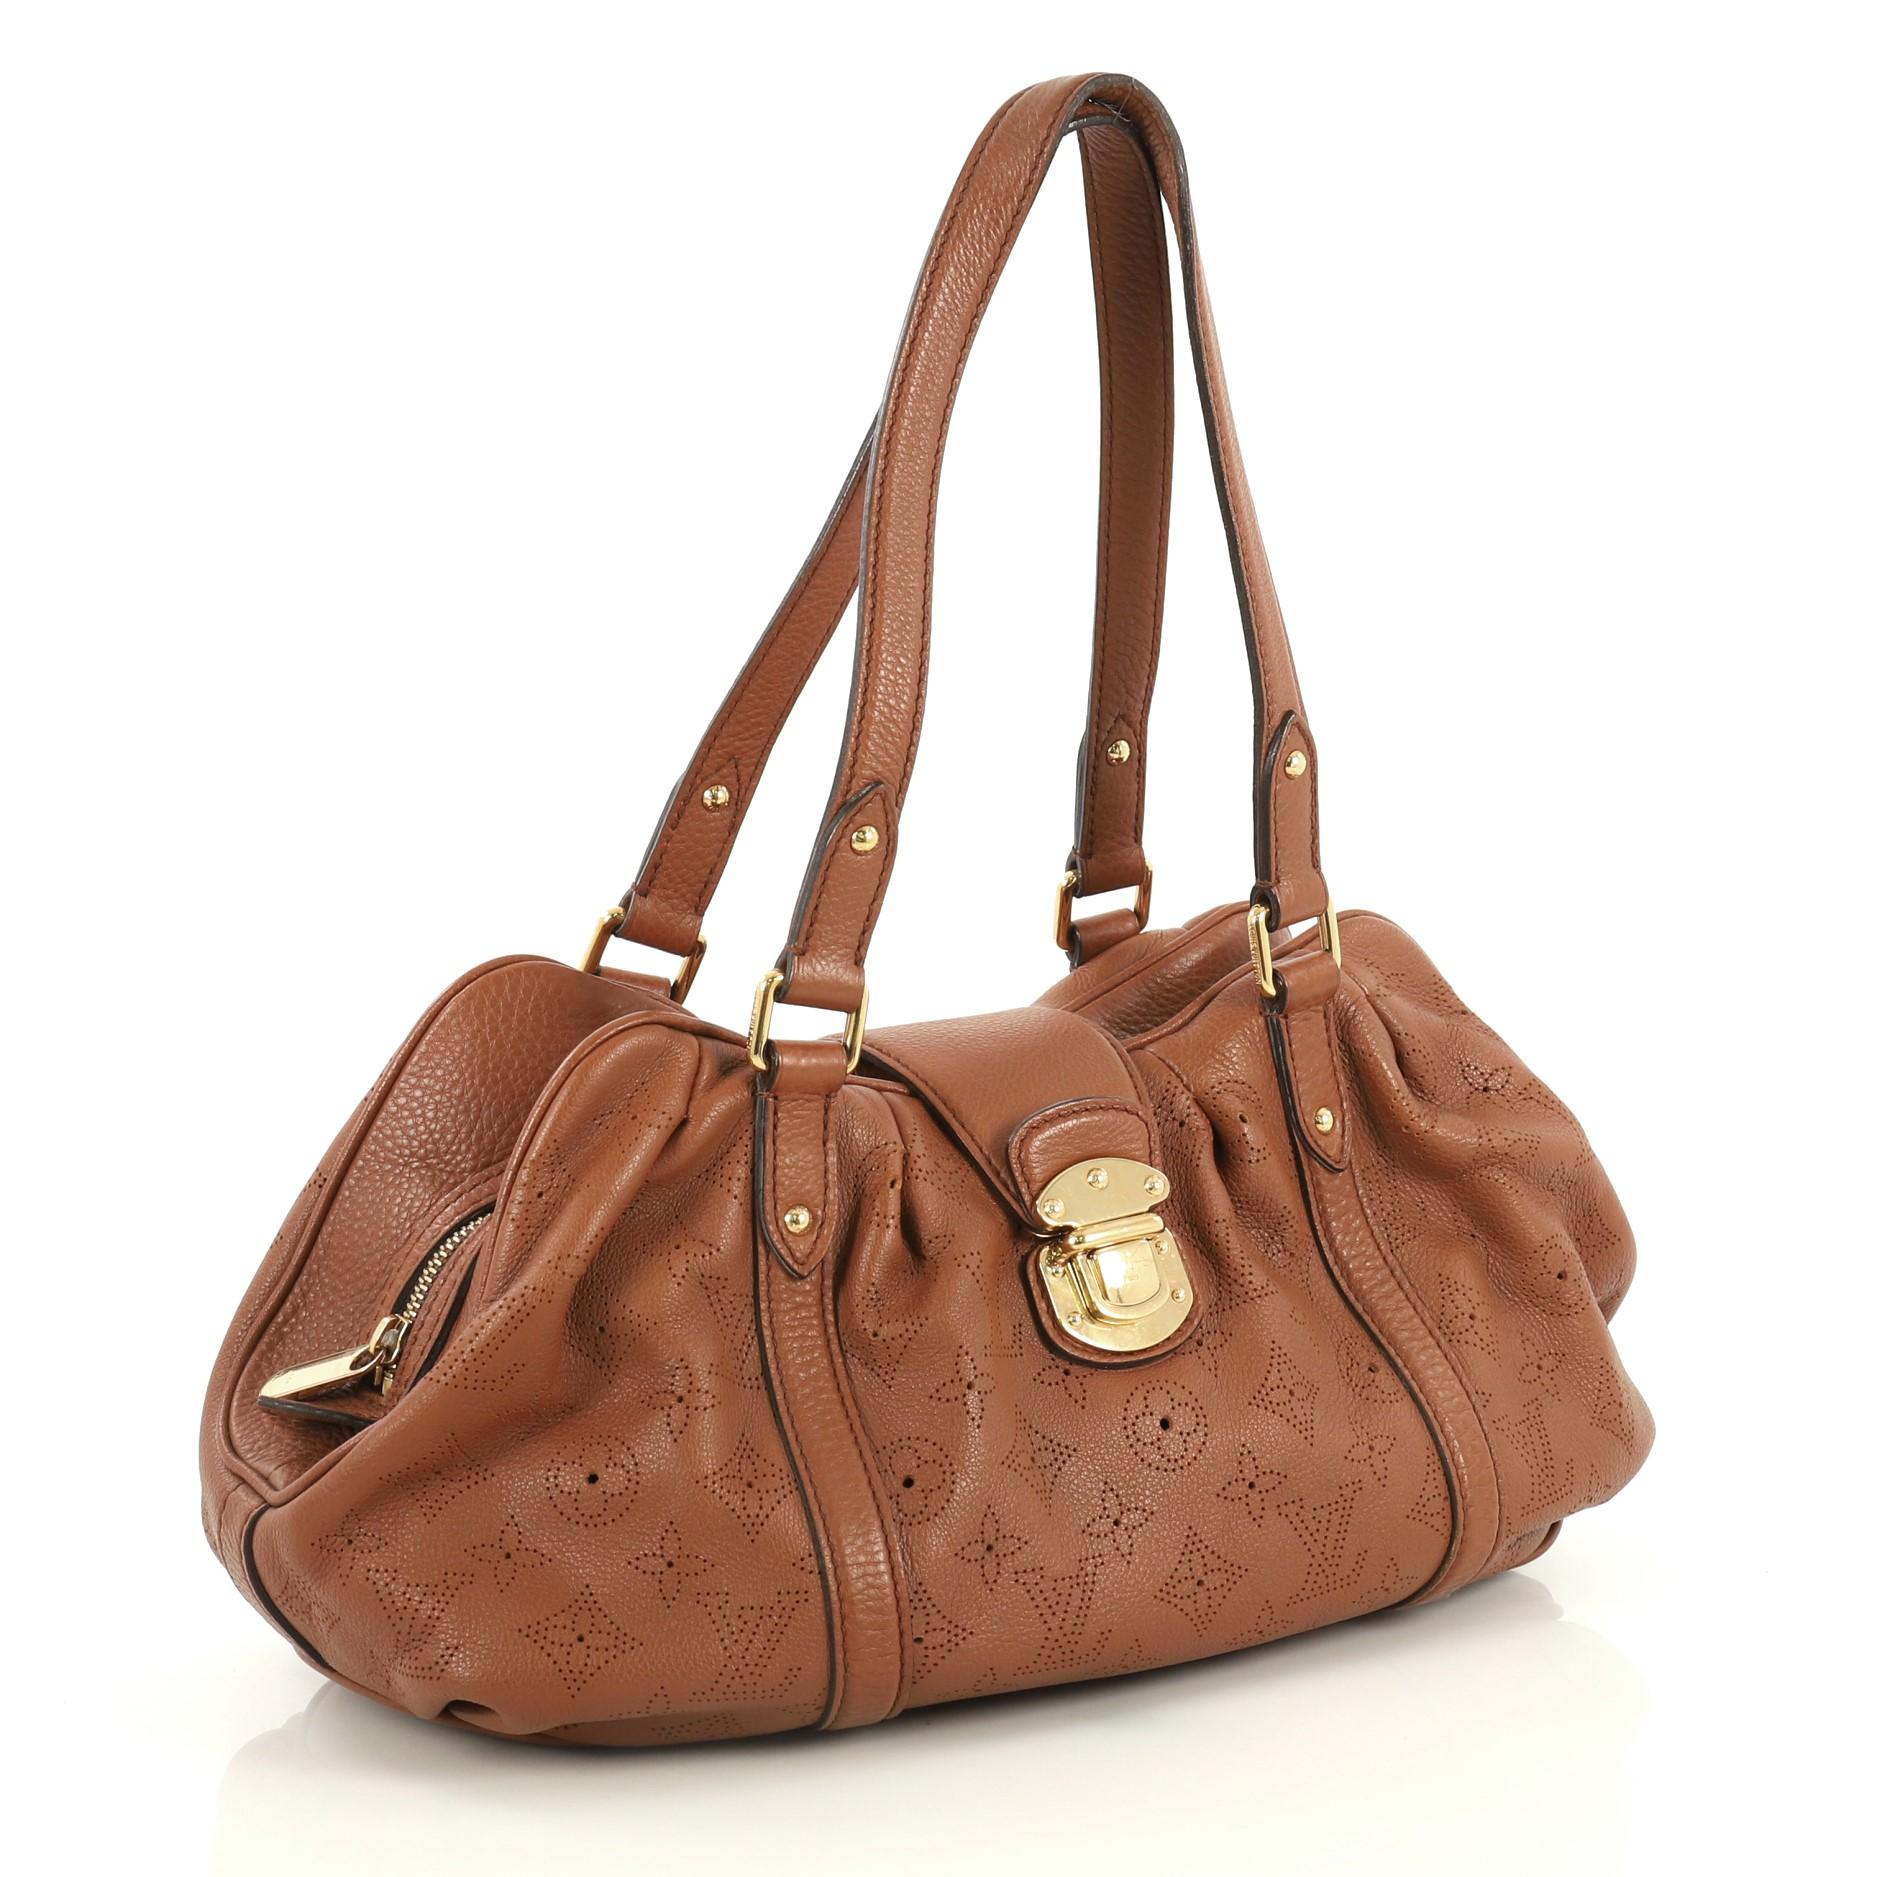 This Louis Vuitton Lunar Handbag Mahina Leather PM, crafted from brown monogram perforated mahina leather, features dual flat tall handles, protective base studs, top flap push-lock closure and gold-tone hardware. Its zip closure opens to a brown